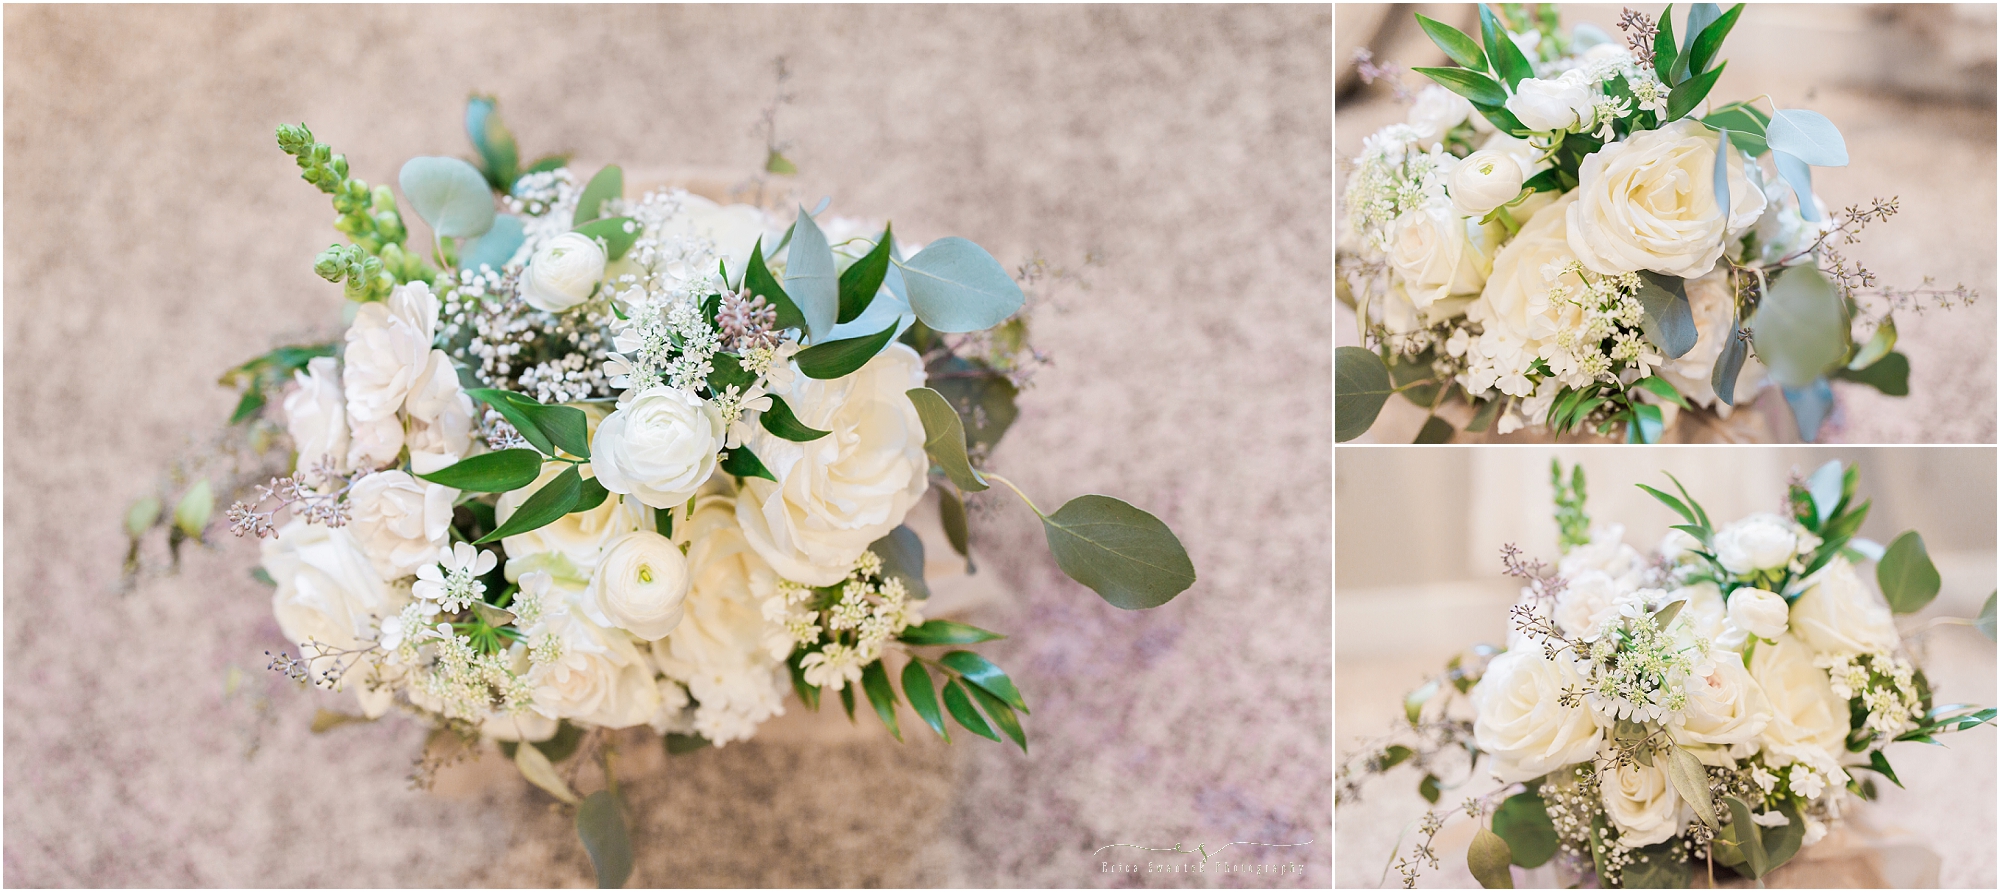 Gorgeous white roses and greenery make the perfect bouquet for this vintage rustic chic Bend wedding by Summer Robbins Flowers. | Erica Swantek Photography